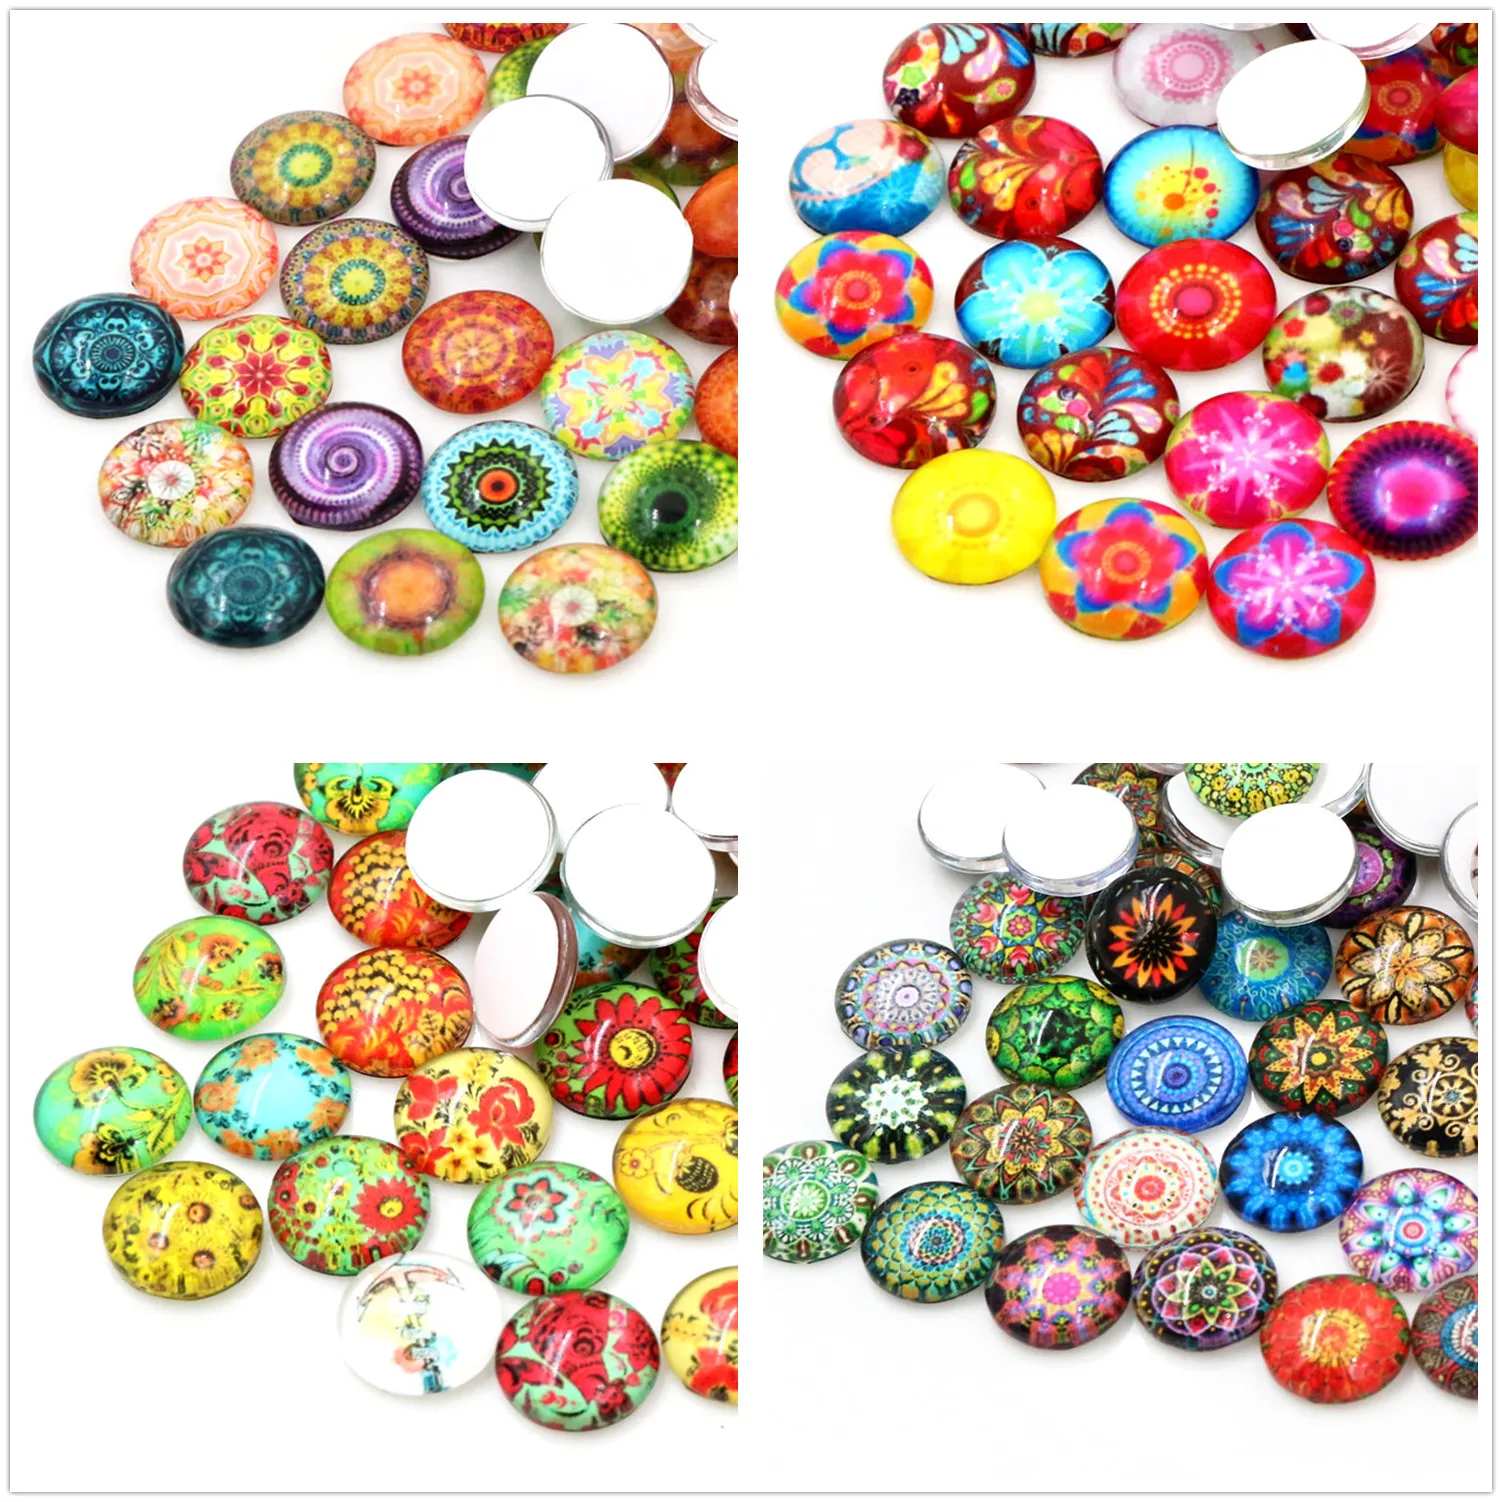 

50pcs/Lot 12mm Colorful Fashion Flower Photo Glass Cabochons Mixed Color Cabochons For Bracelet earrings necklace Bases Settings